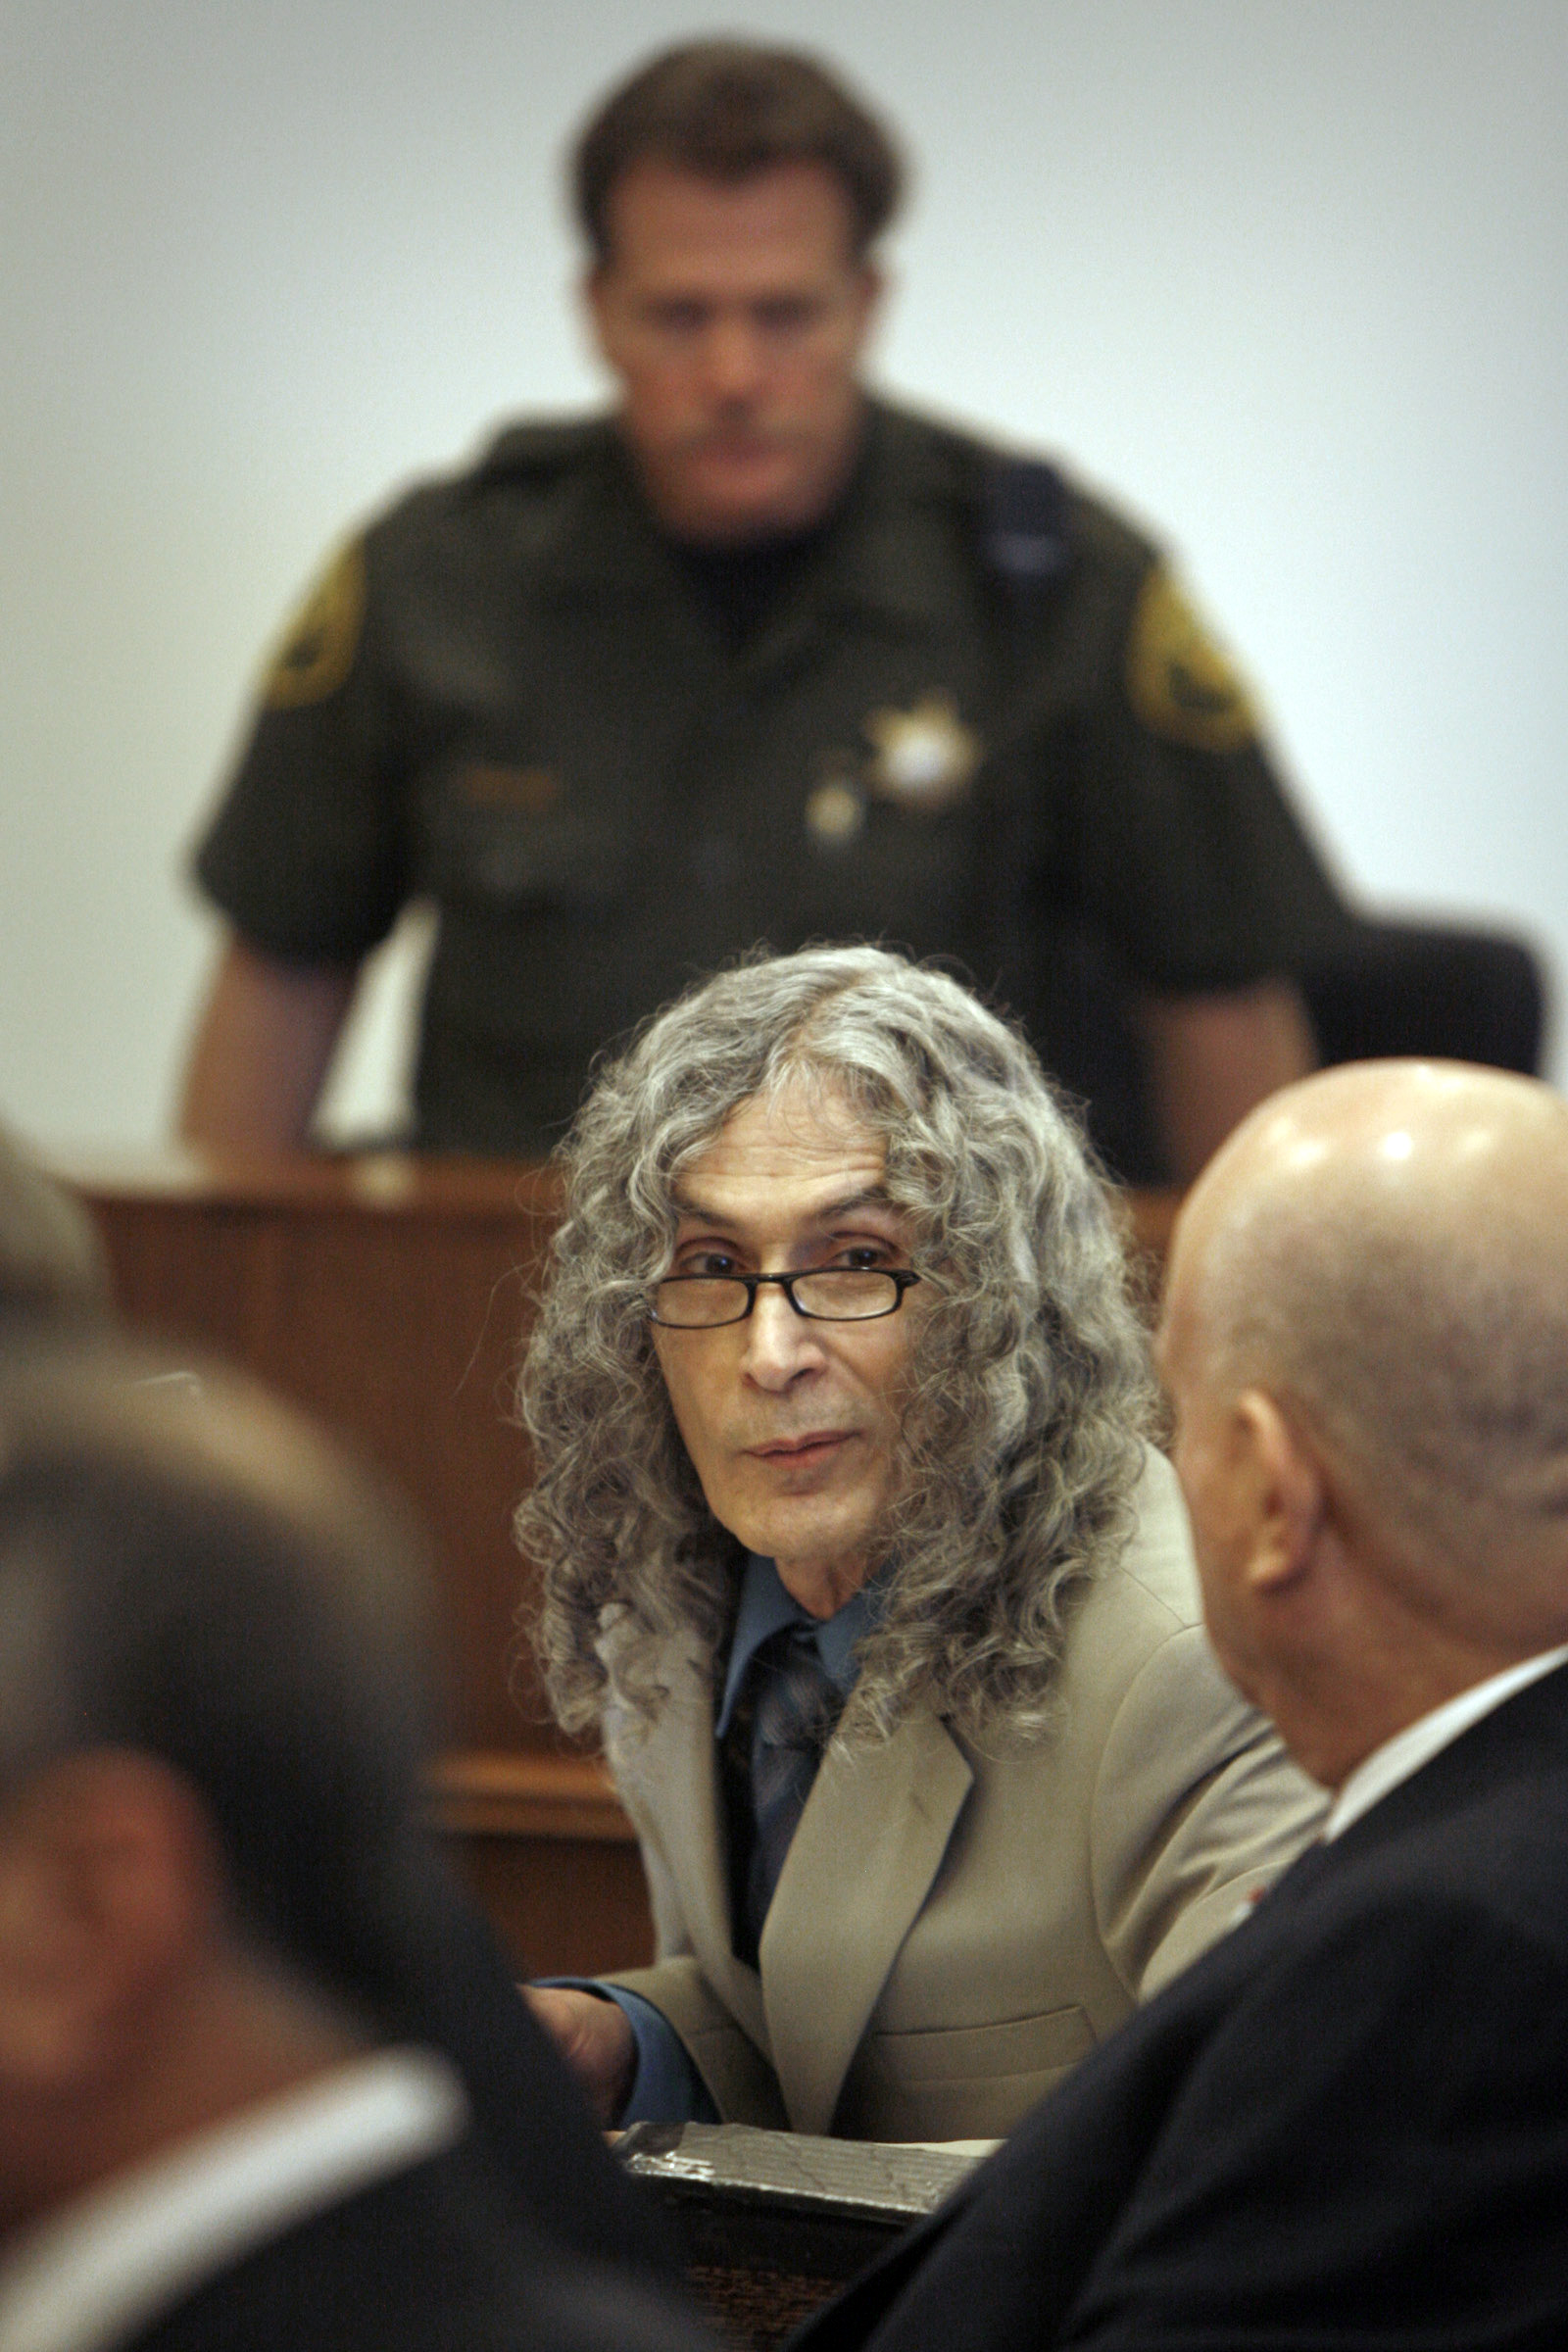 PHOTO: Accused serial killer Rodney Alcala appears for a court proceeding in Orange County Superior Court in Santa Ana, Calif., Jan. 11, 2010.